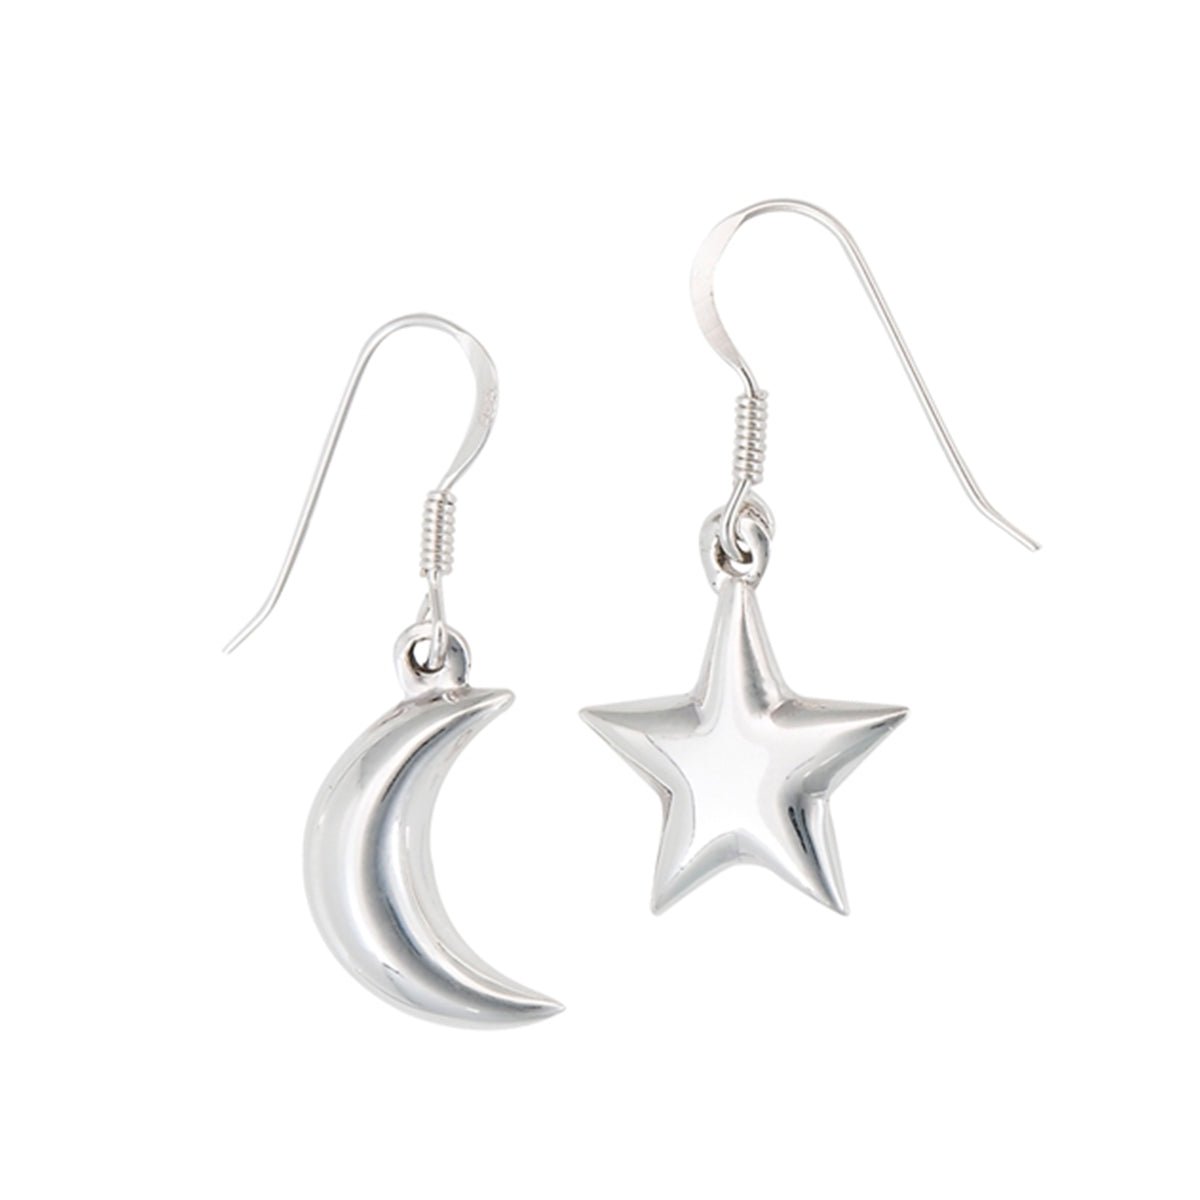 Crescent Moon and Star Earrings - 13 Moons